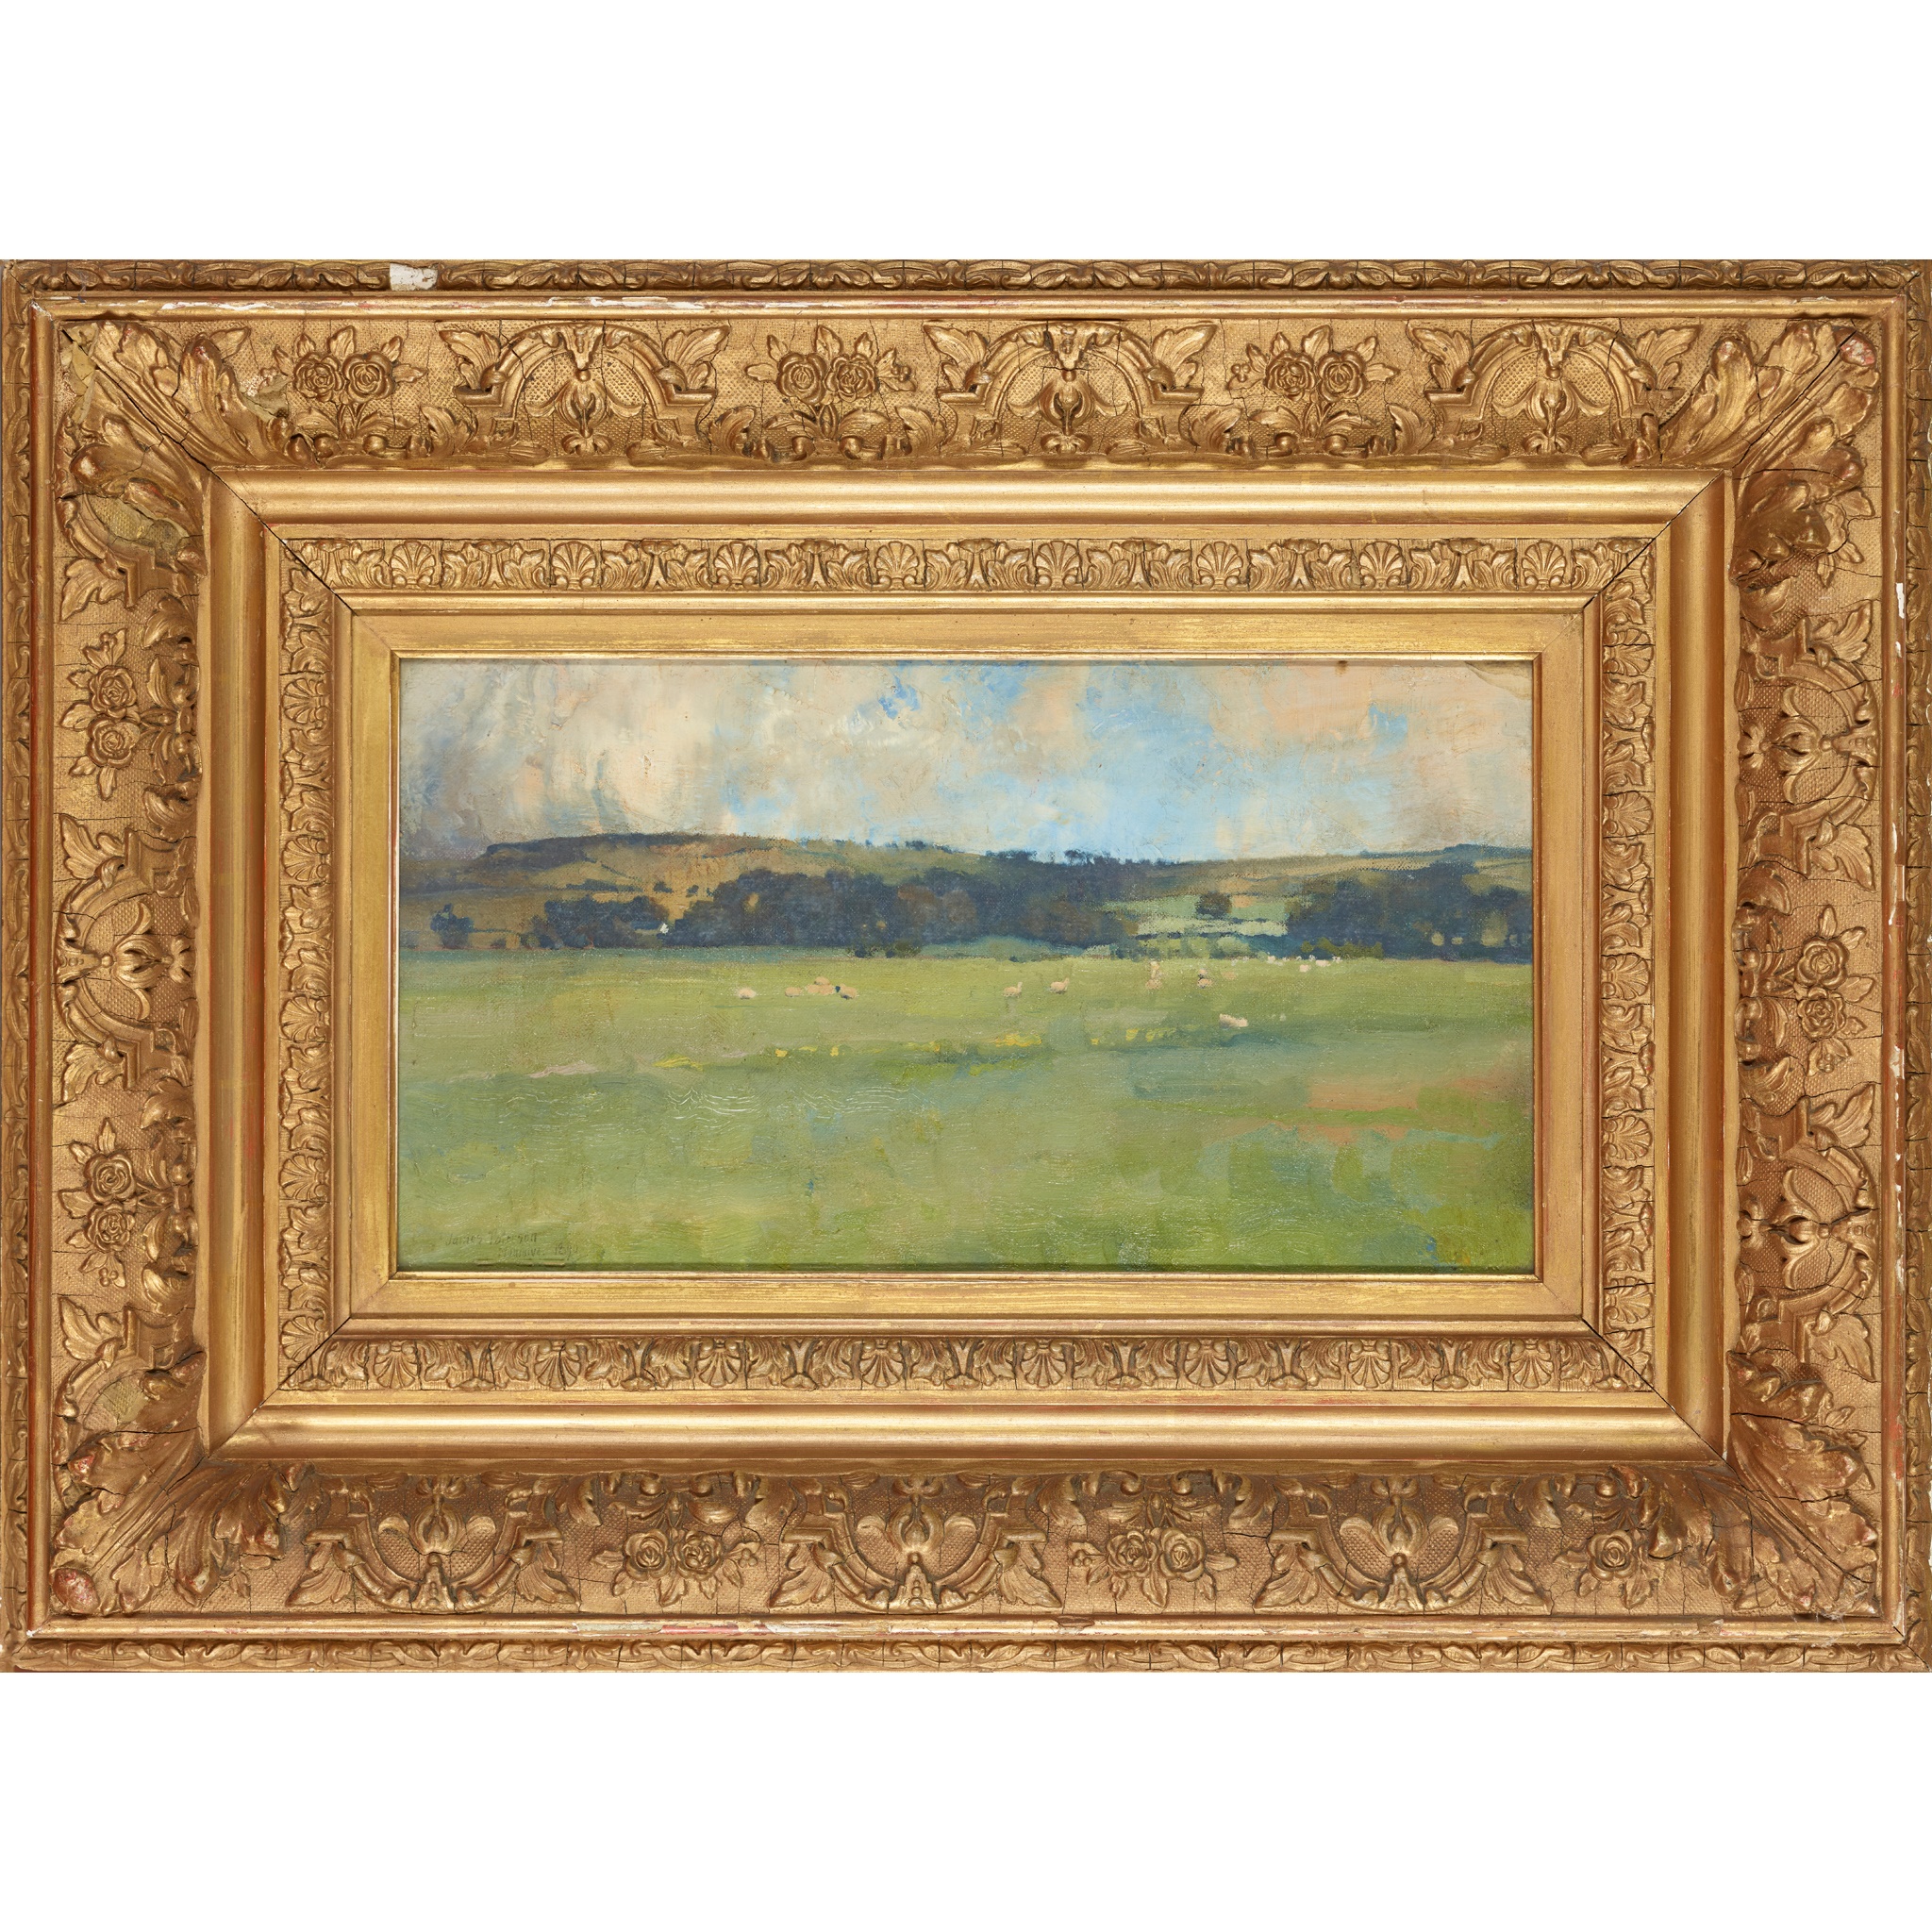 JAMES PATERSON R.S.W., R.S.A., R.W.S. (SCOTTISH 1854-1932) SUMMER PASTURES - Image 2 of 3